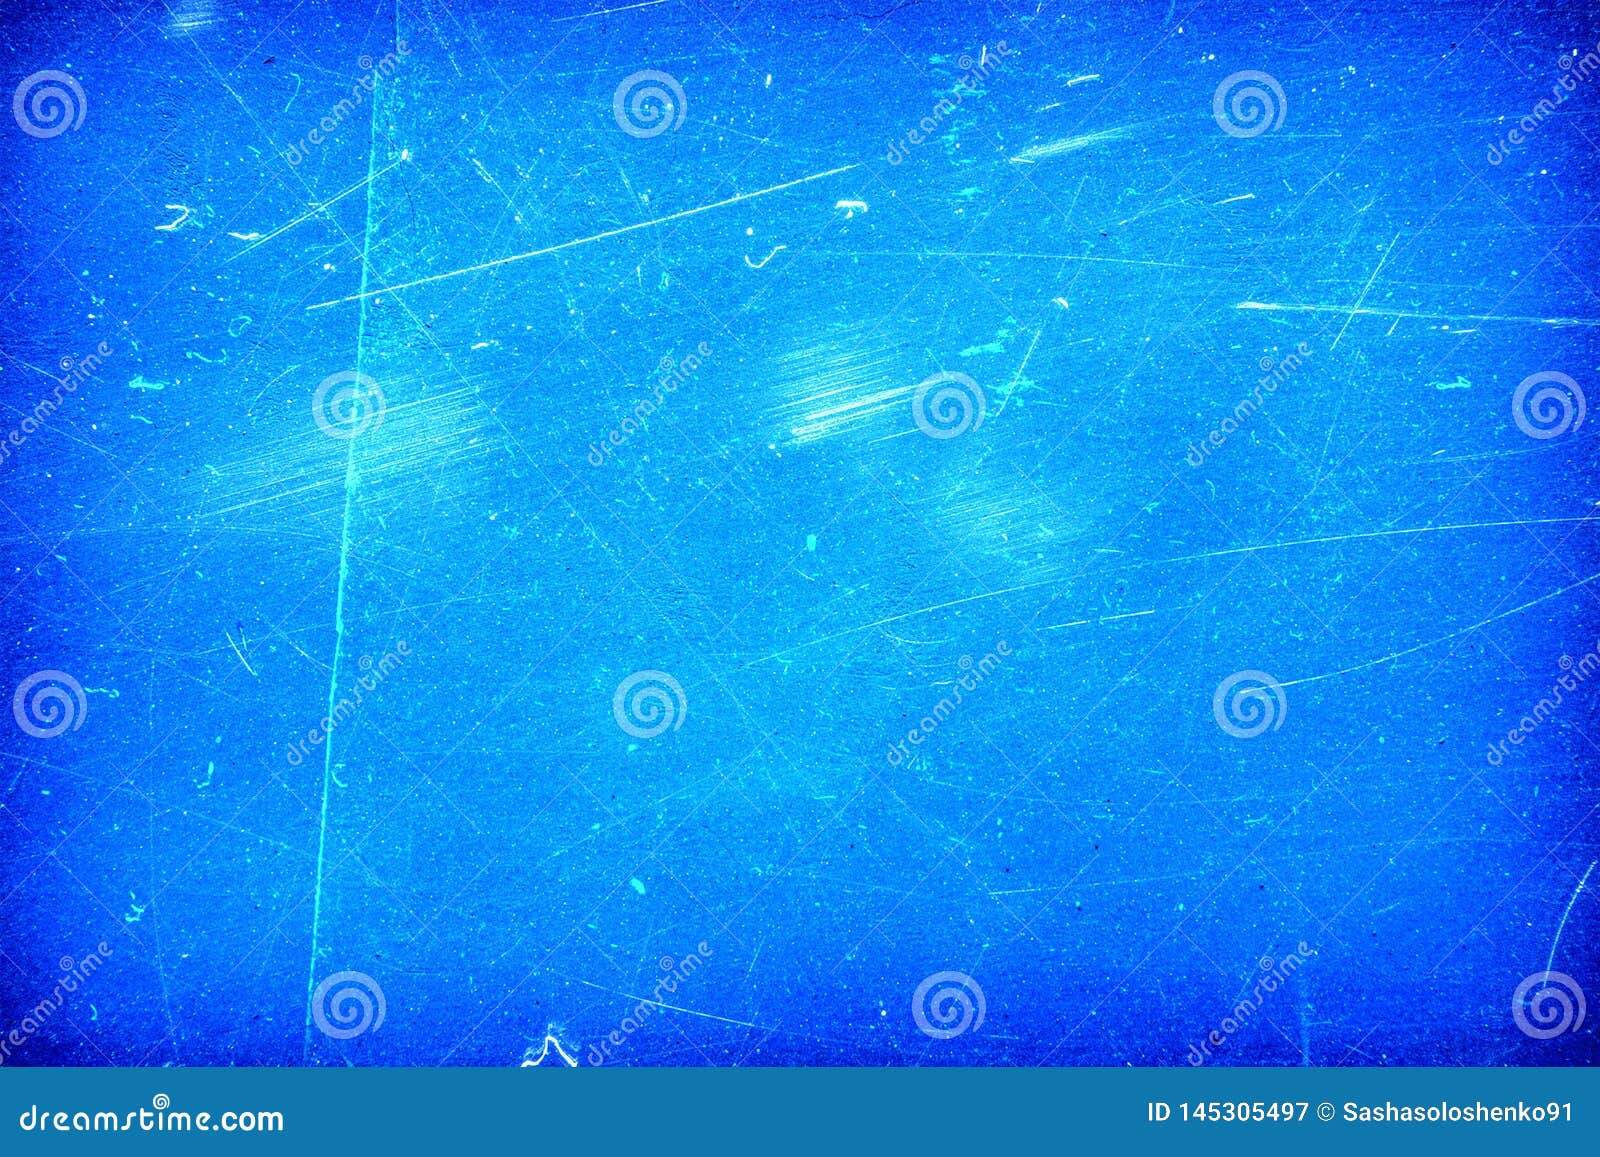 blue abstract scratched background. vignette. grunge texture.